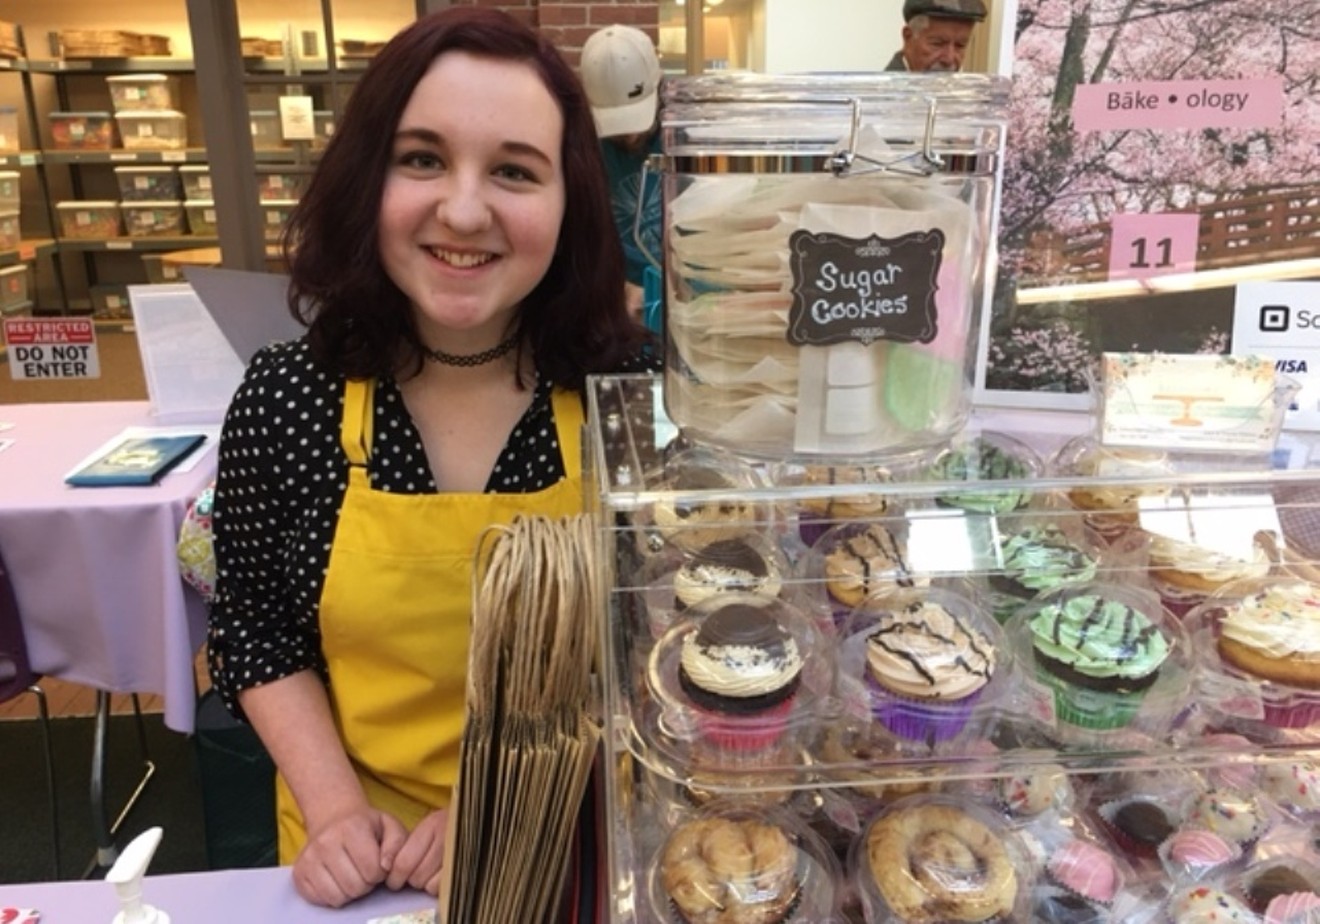 Rain Adams sells her baked goods at the YouthBiz Marketplace.